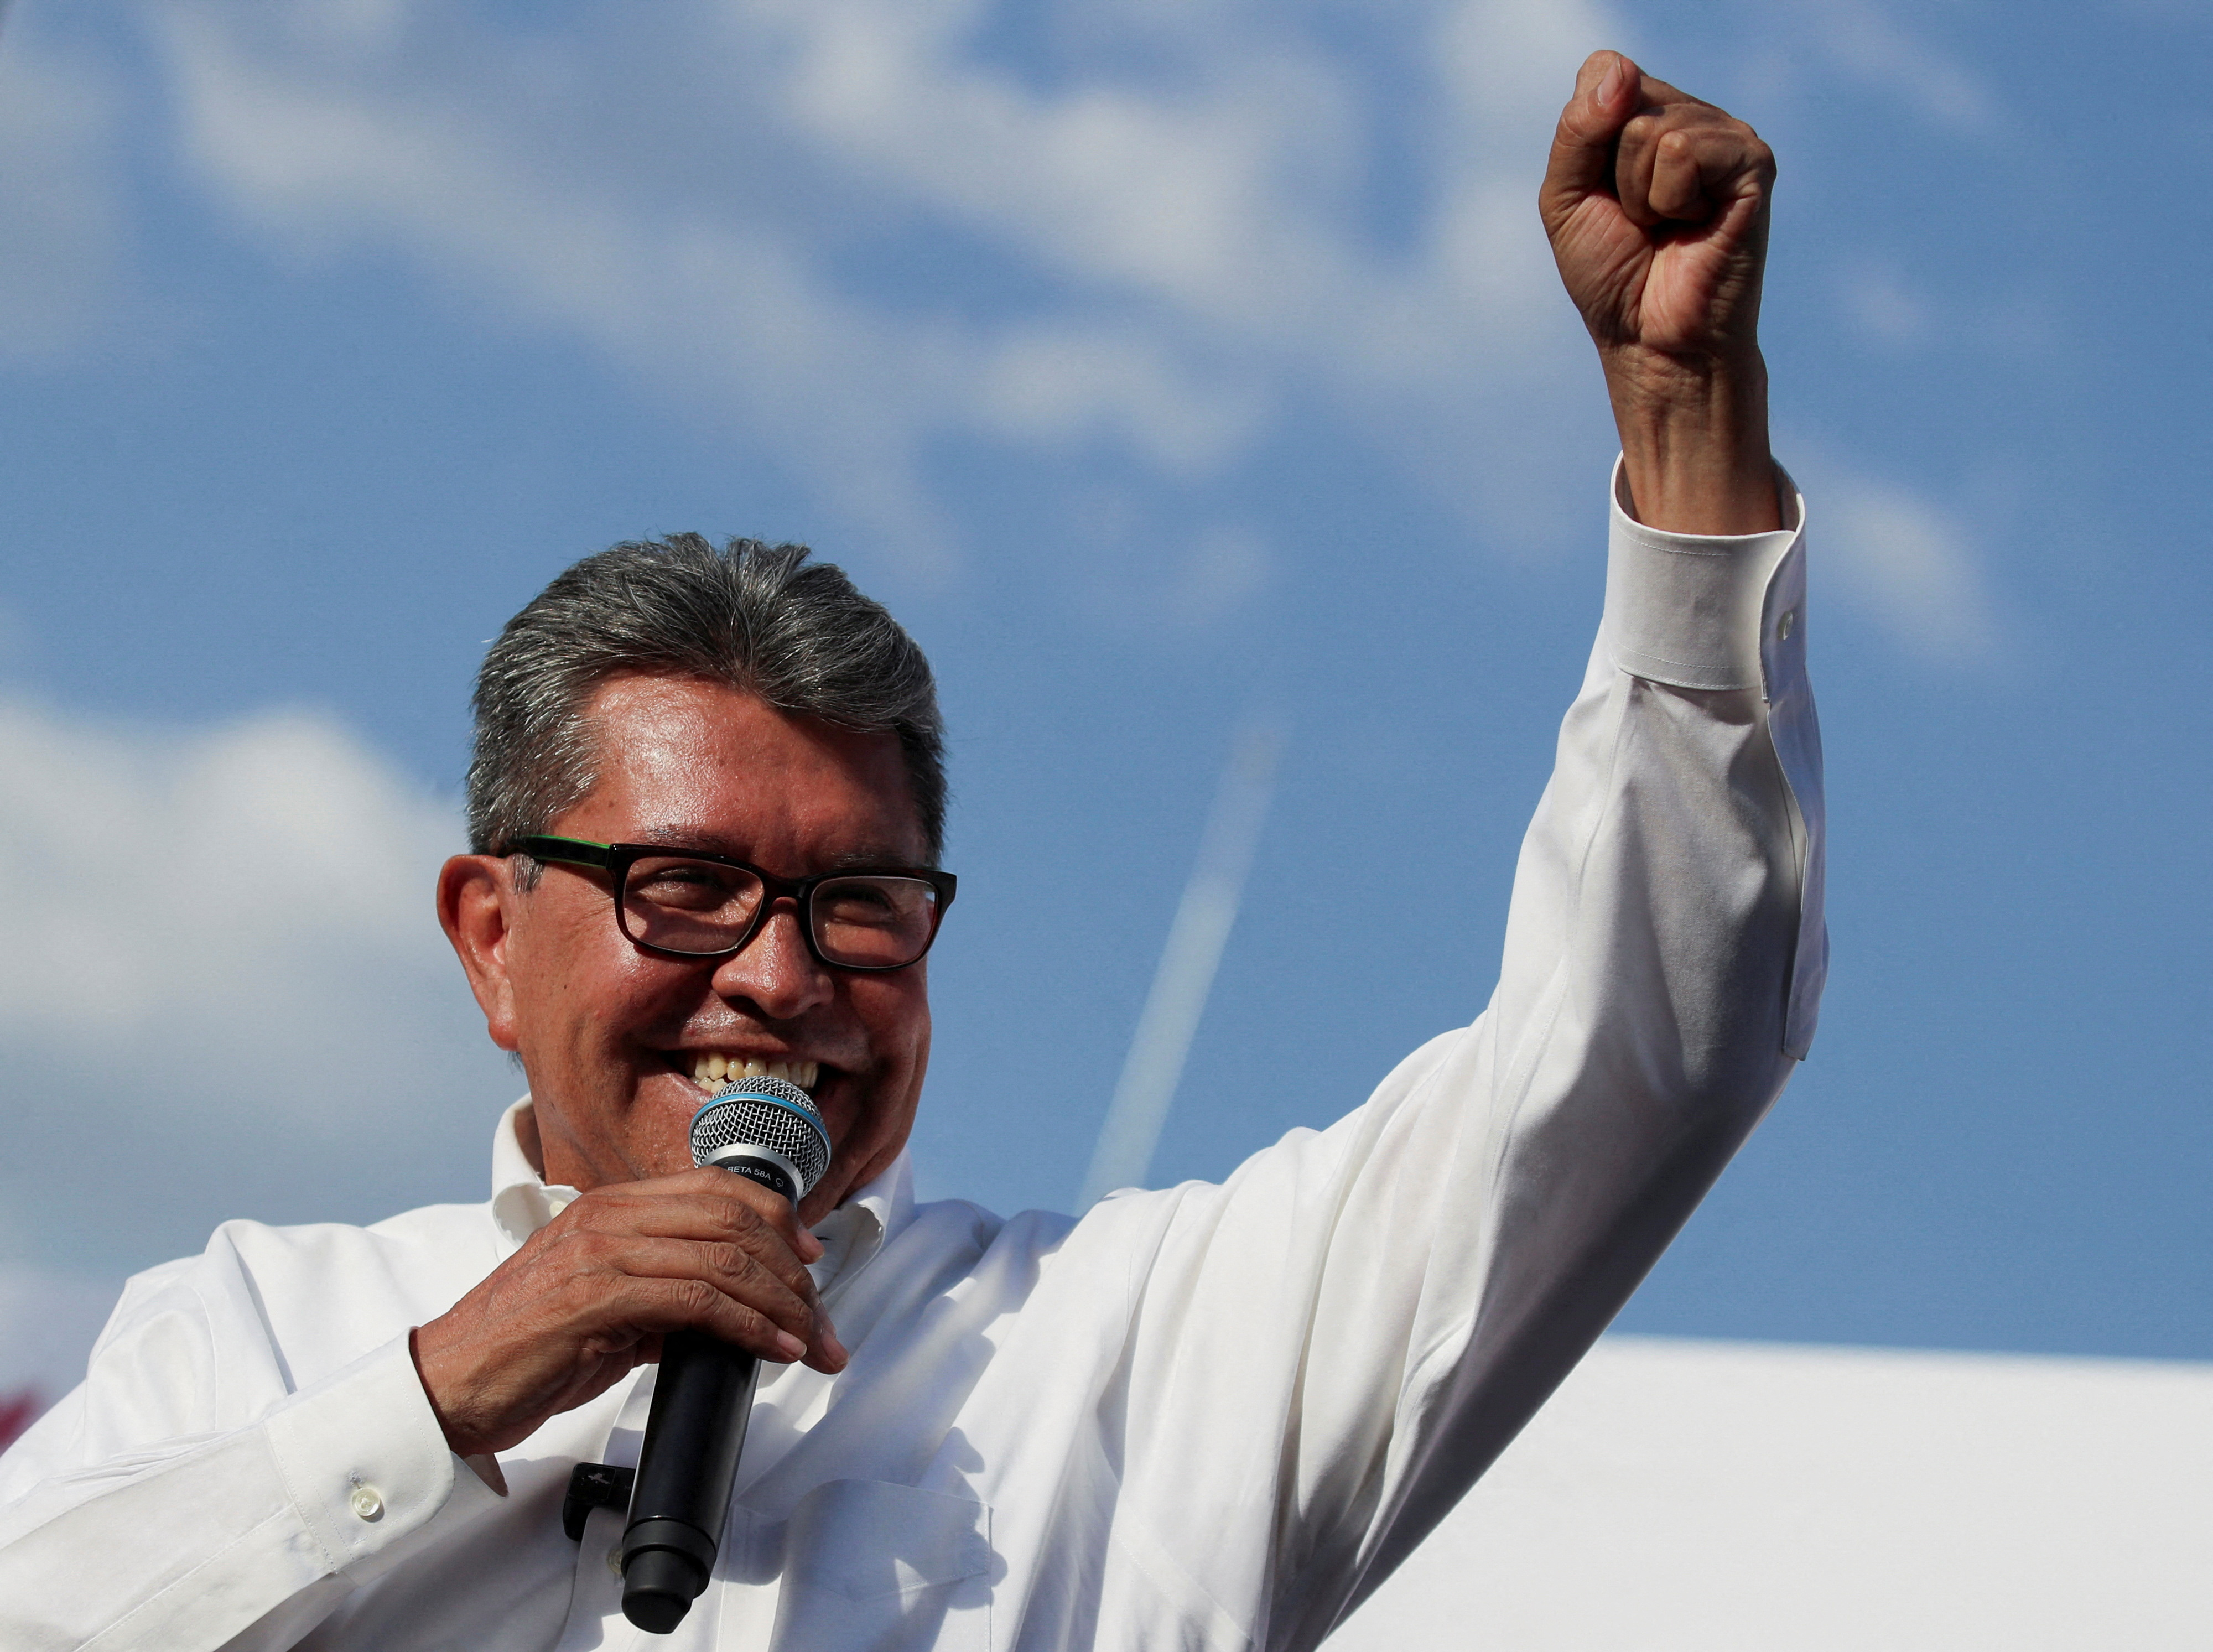 Mexico's former Senator Ricardo Monreal, one of the candidates pursuing the ruling MORENA party's candidacy for the 2024 presidential election, takes part in a campaign rally in Mexico City